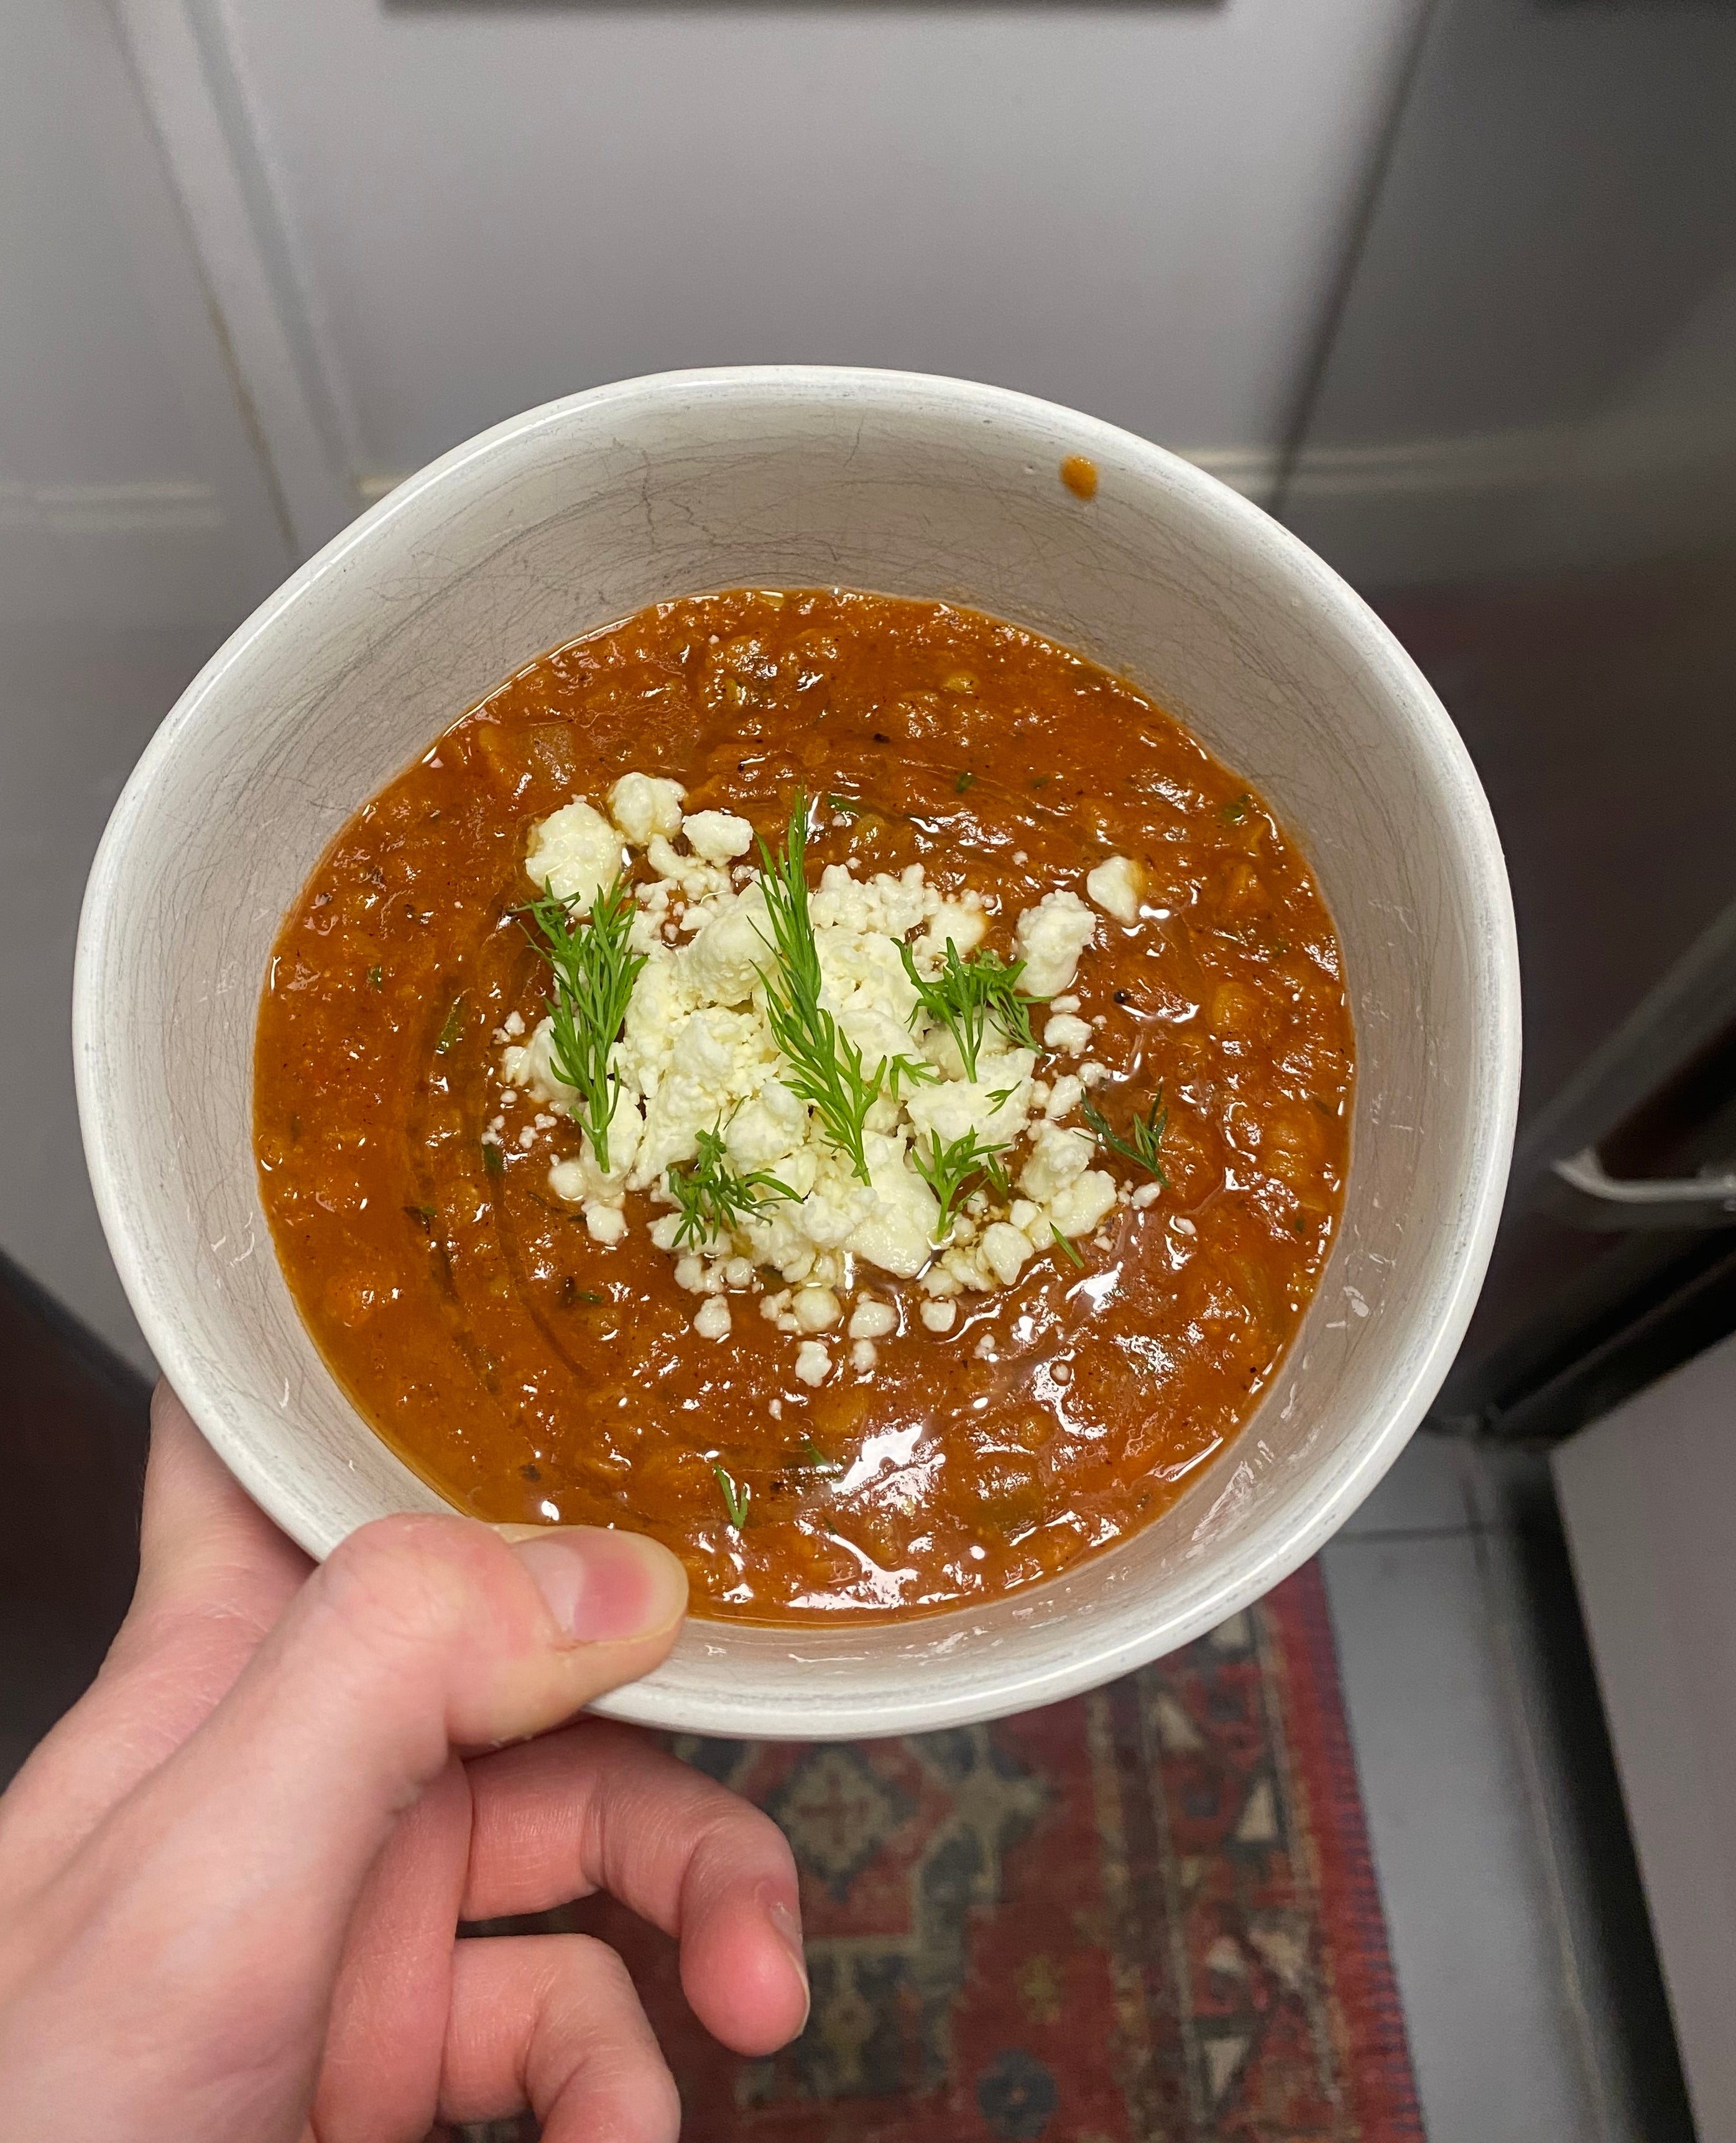 A person holding a bowl of tomato soup garnished with crumbled cheese and herbs